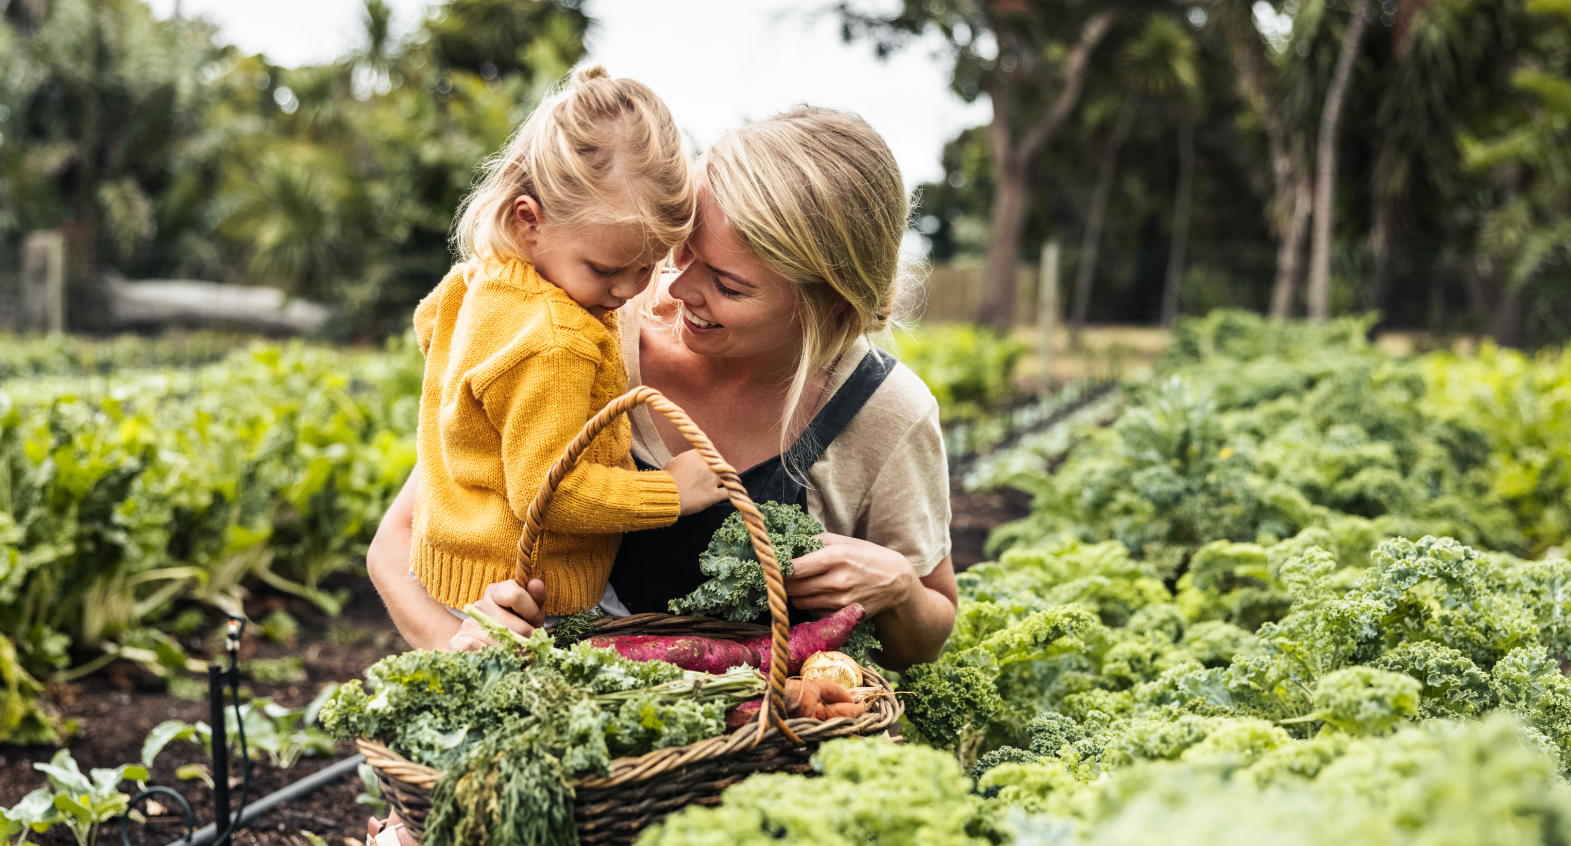 a child and caregiver with a basket of fresh greens in a garden